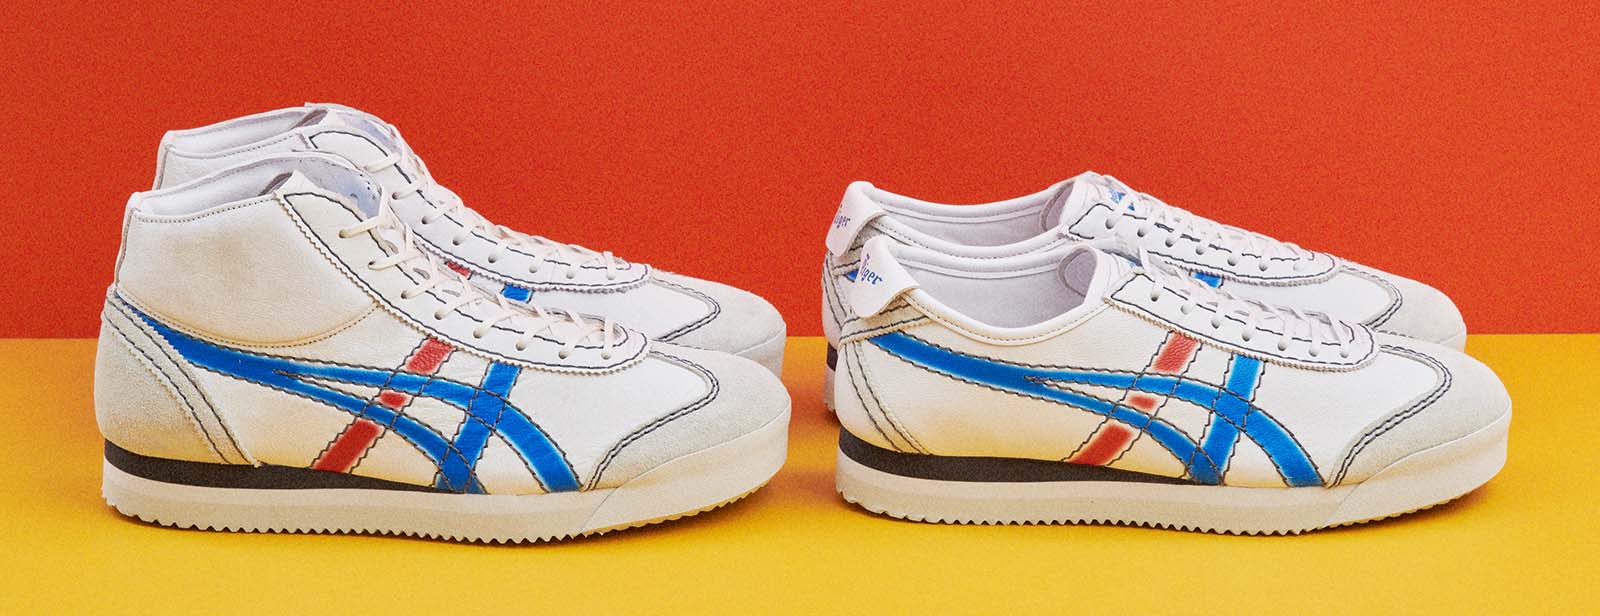 6 favourite shoes from Onitsuka Tiger's Tricolor Series